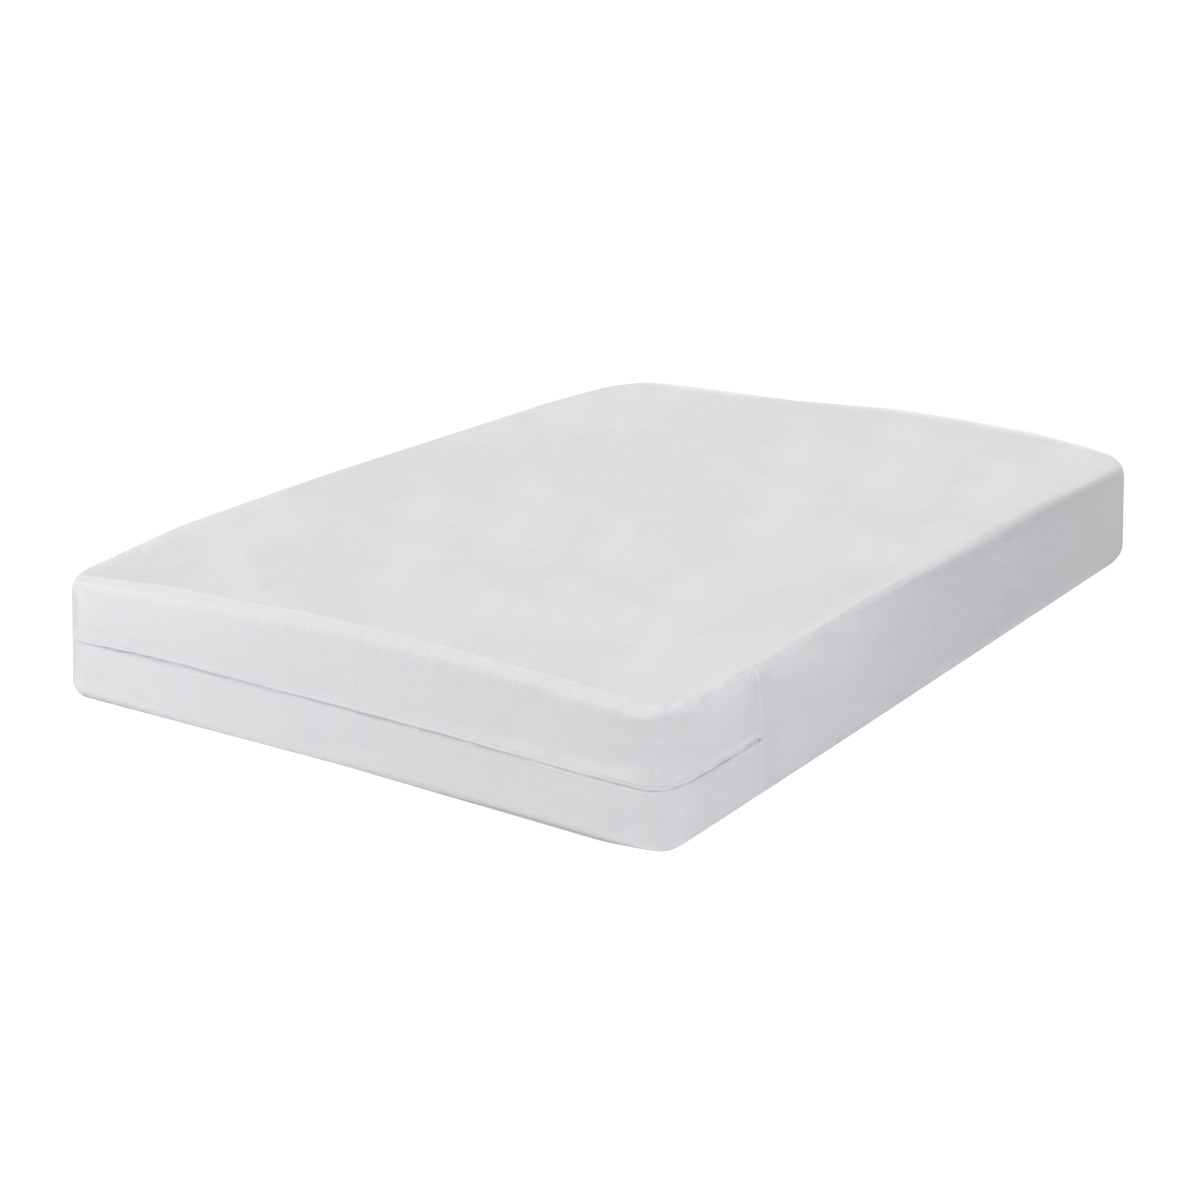 Fre14602whit10 Original Bed Bug Blocker Zippered Pillow Protector White - Standard - Pack Of 2